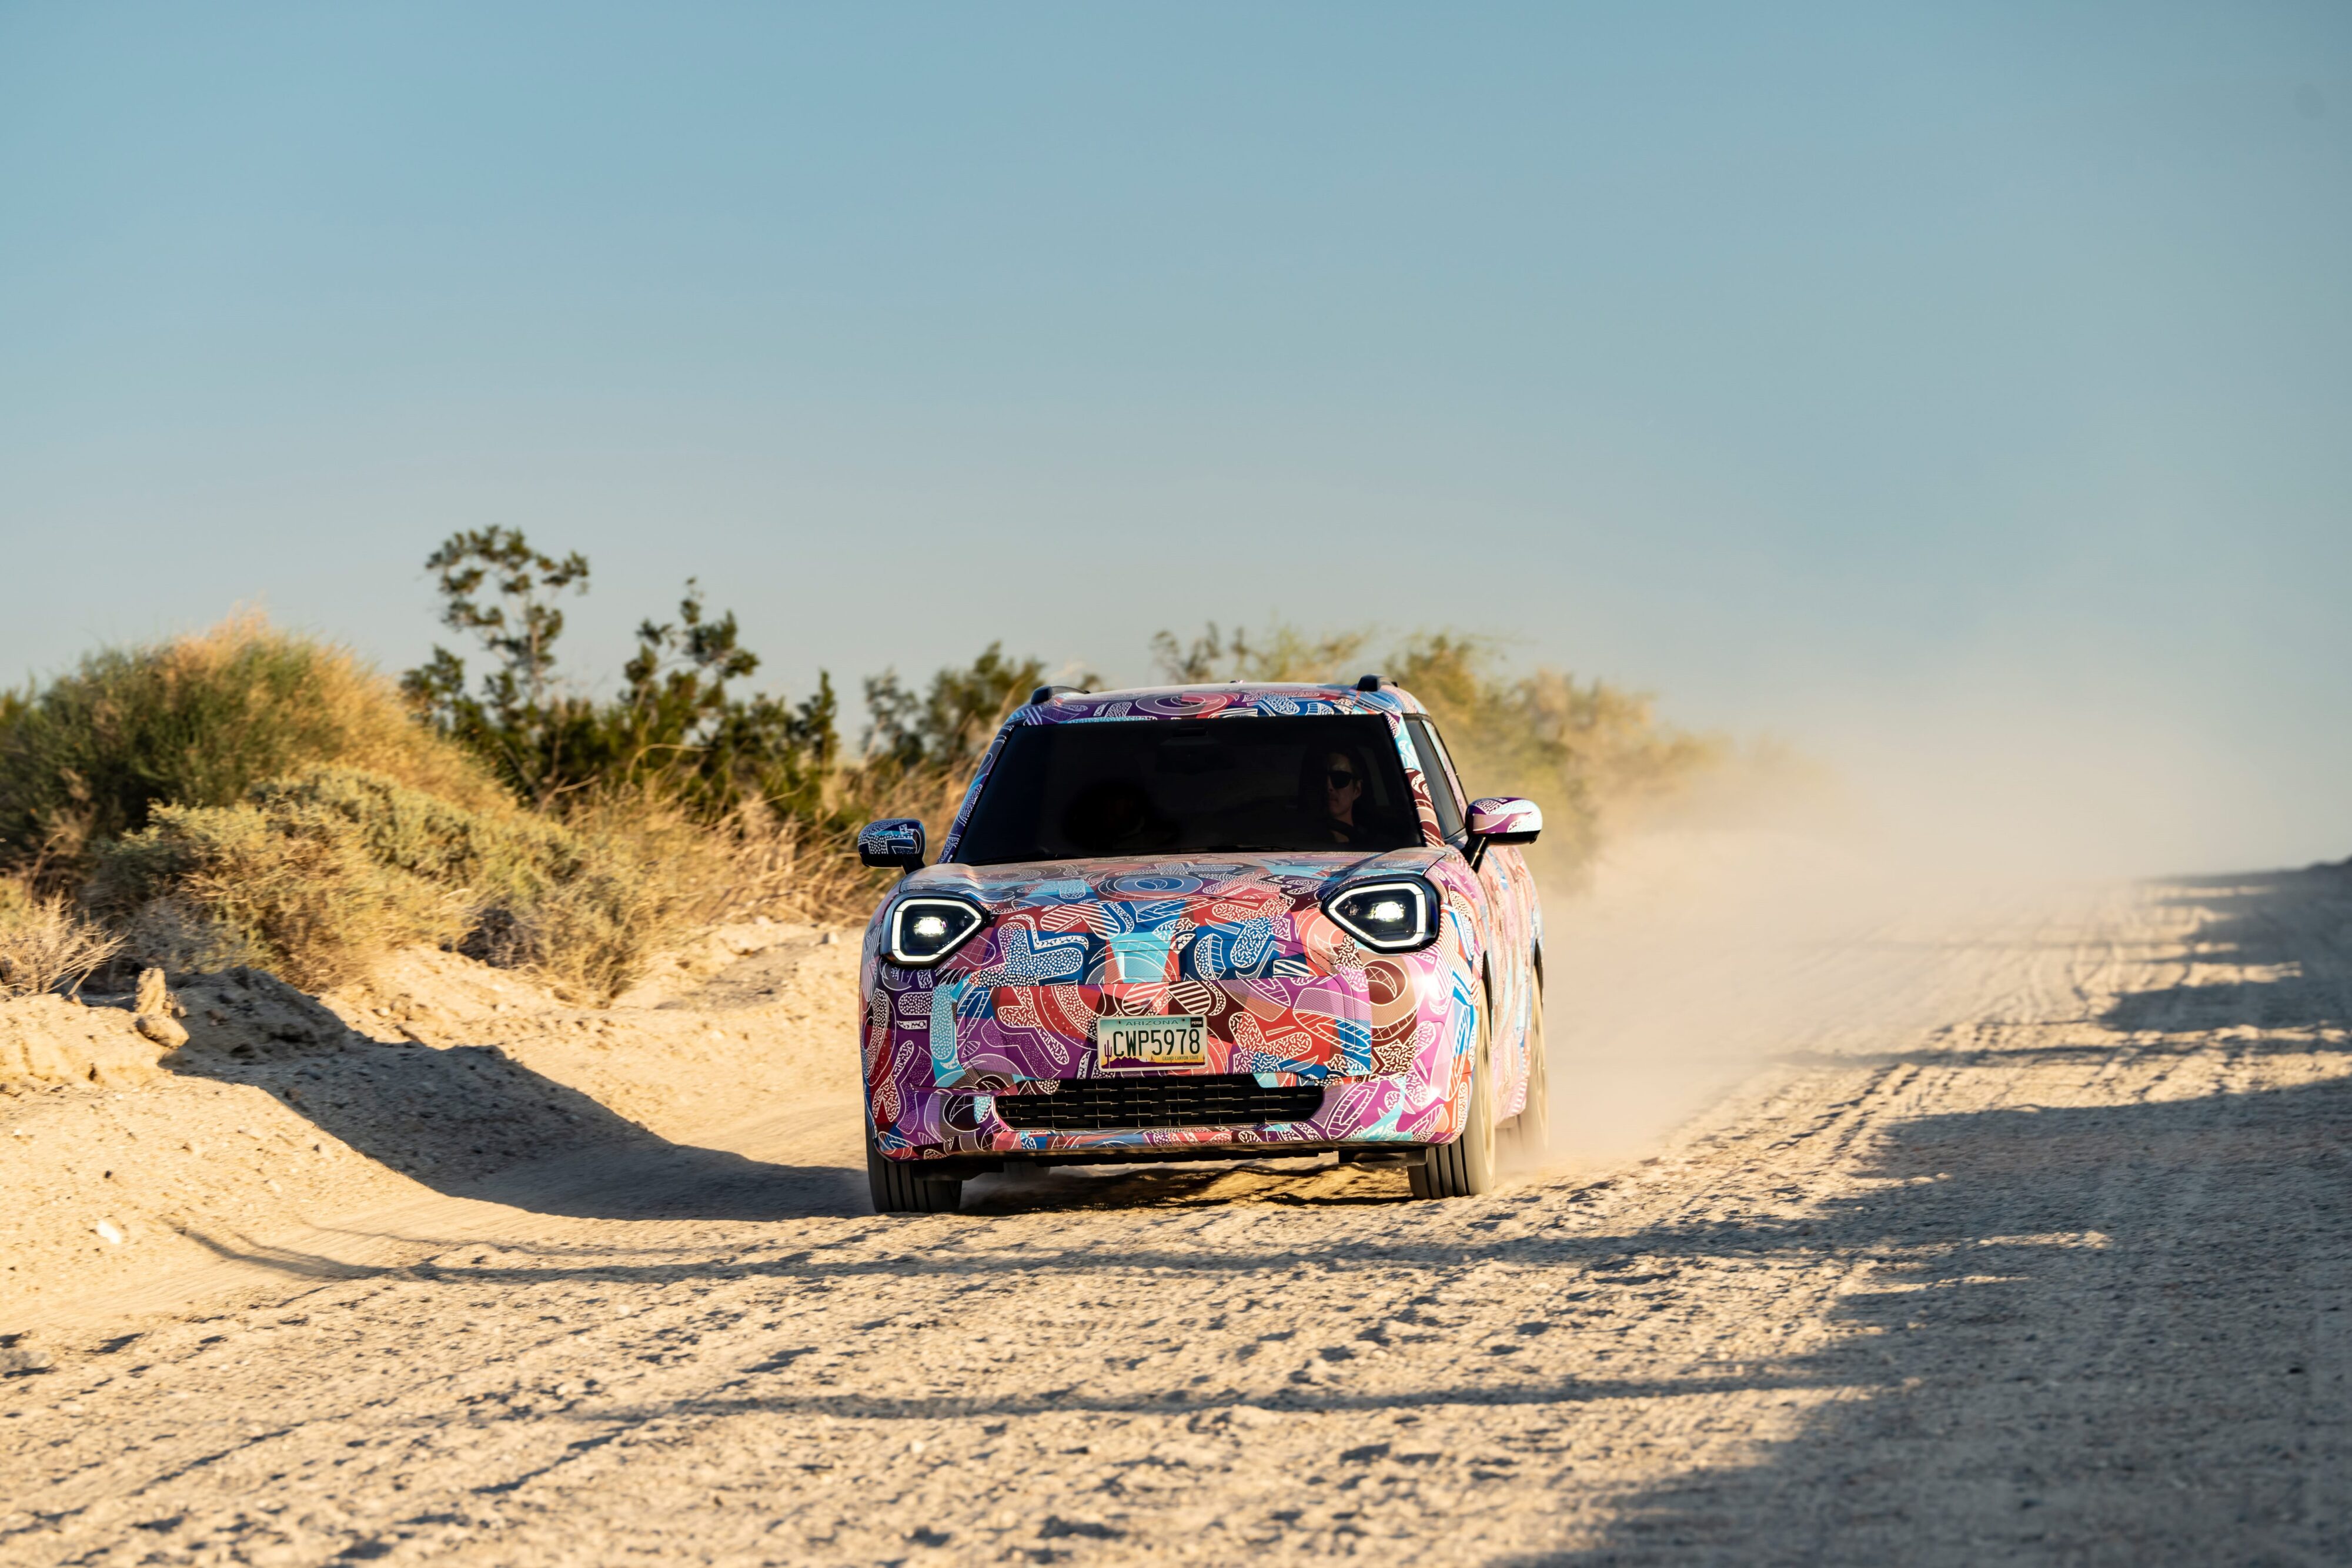 Promotional photo of a Mini Aceman in camouflage undergoing desert testing.